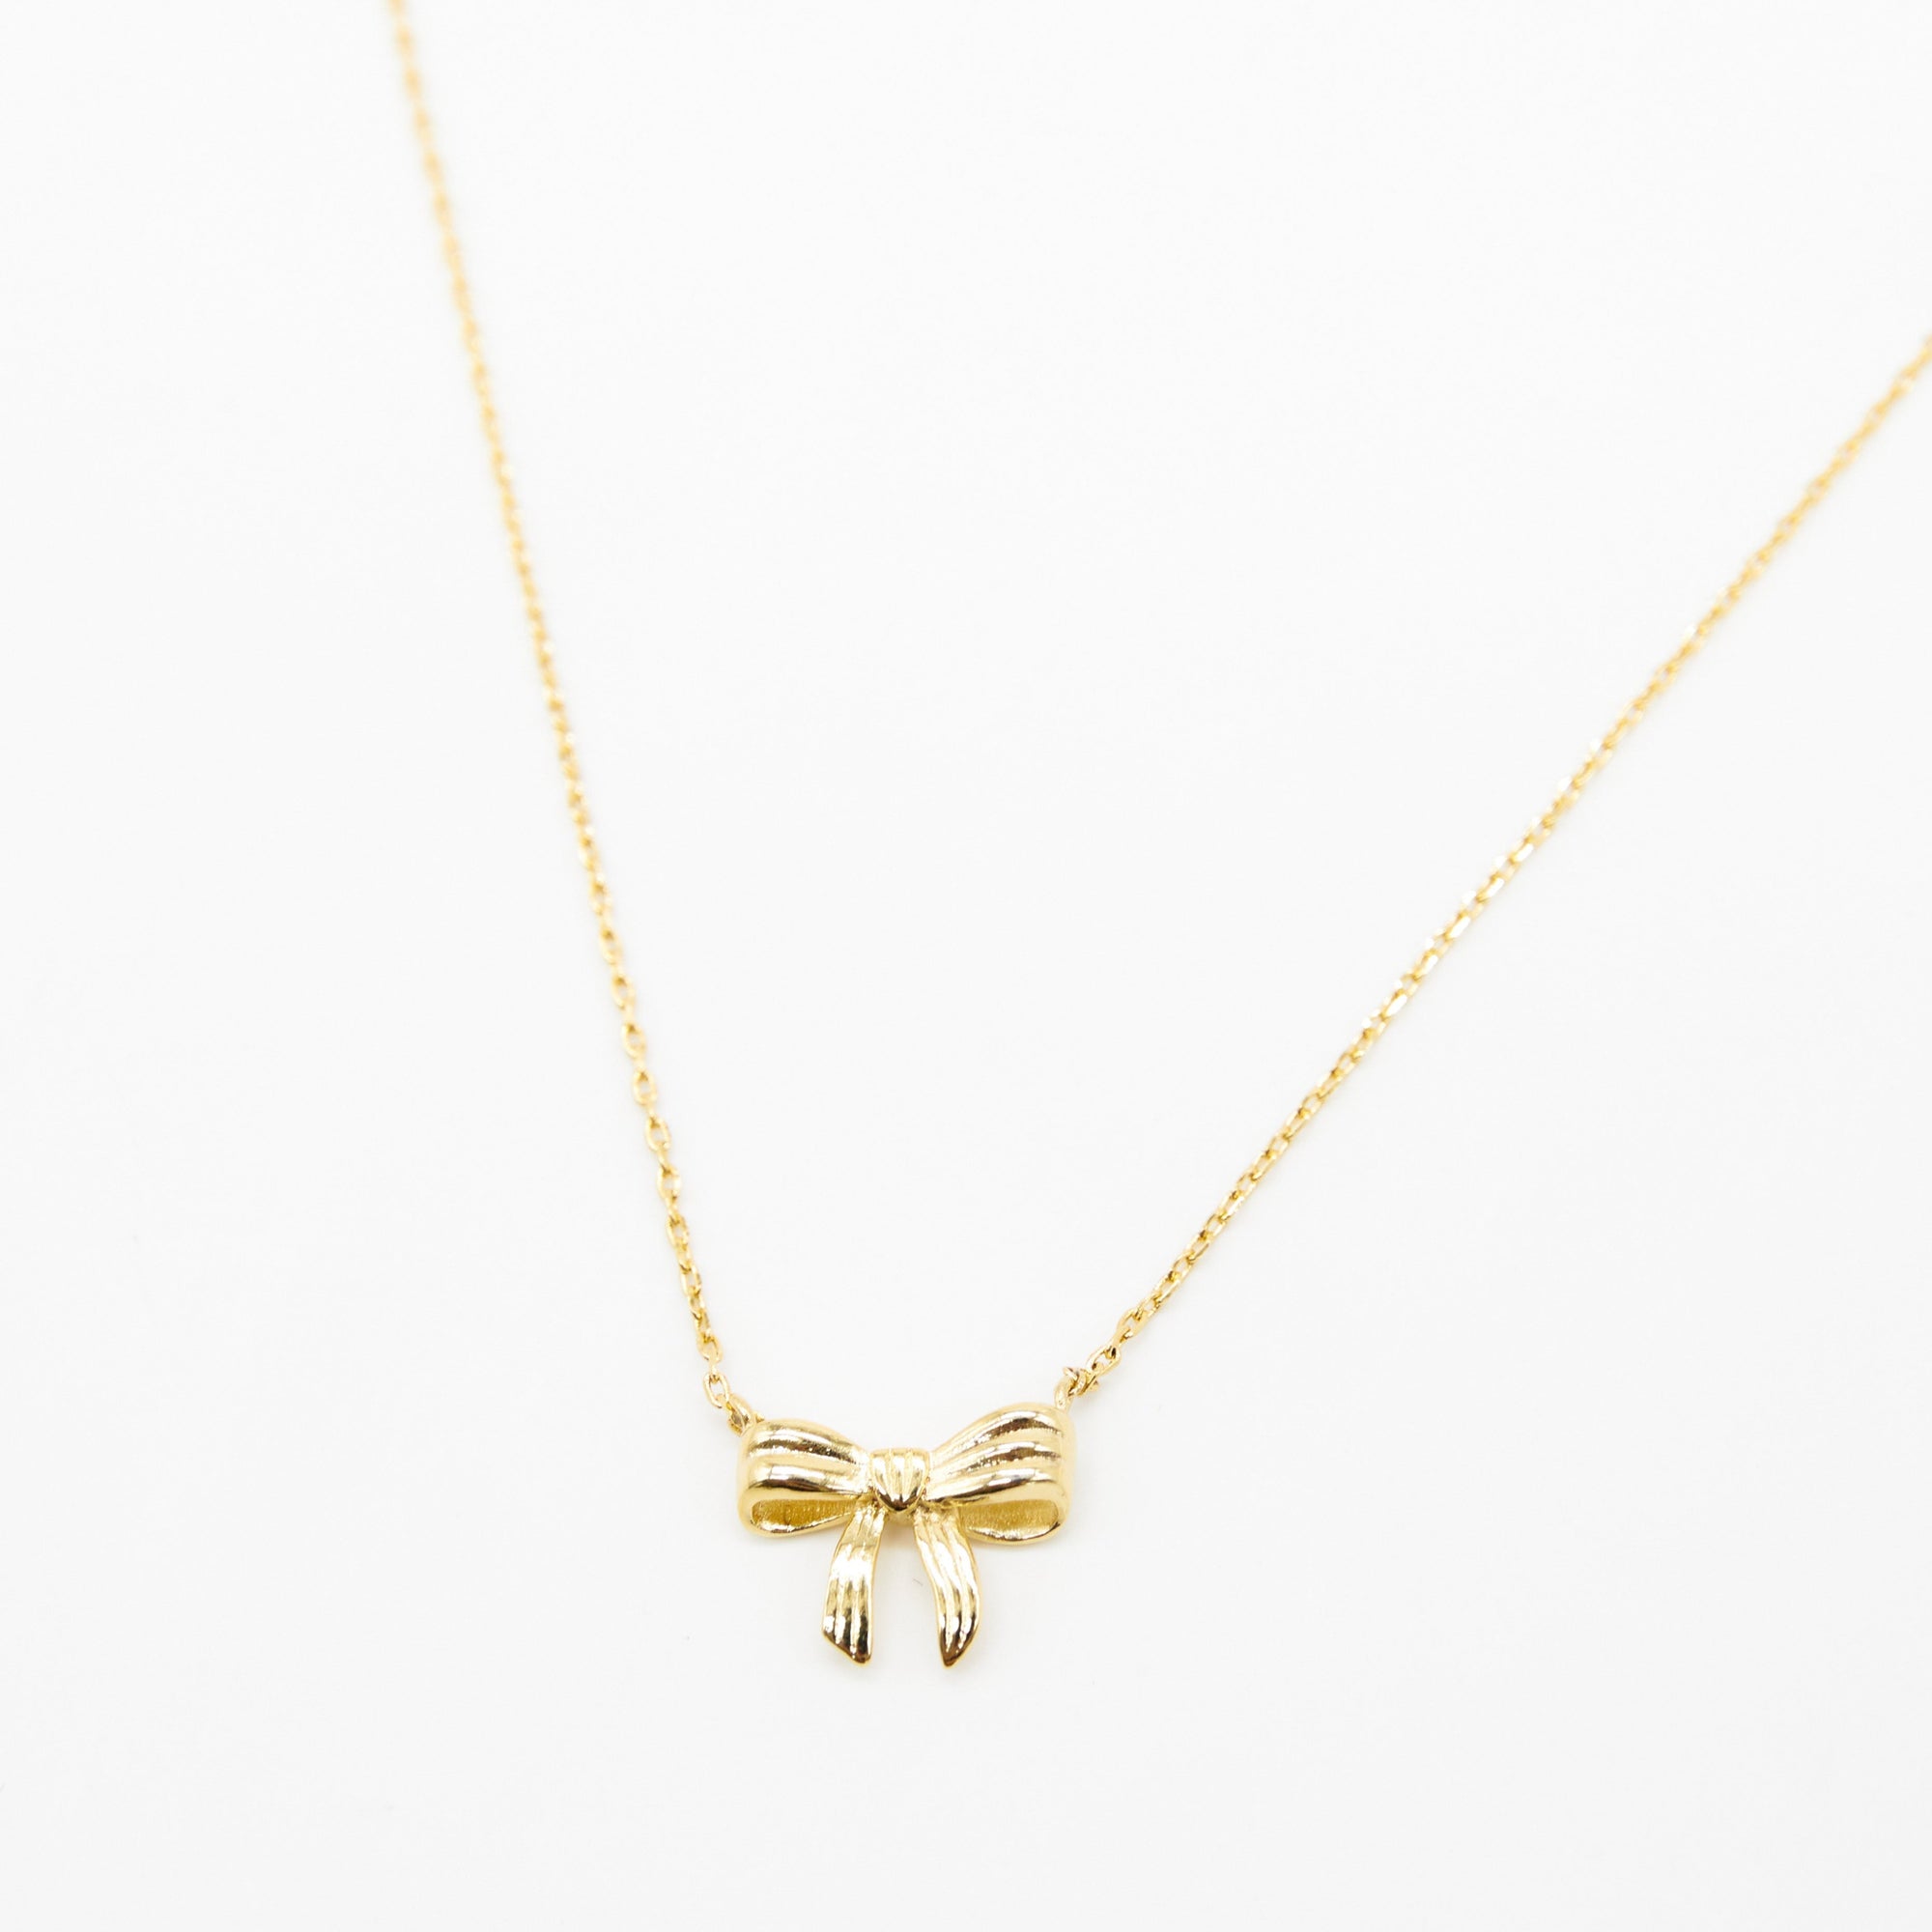 Gold Chain Necklace with Bow - Stella + Gemma 